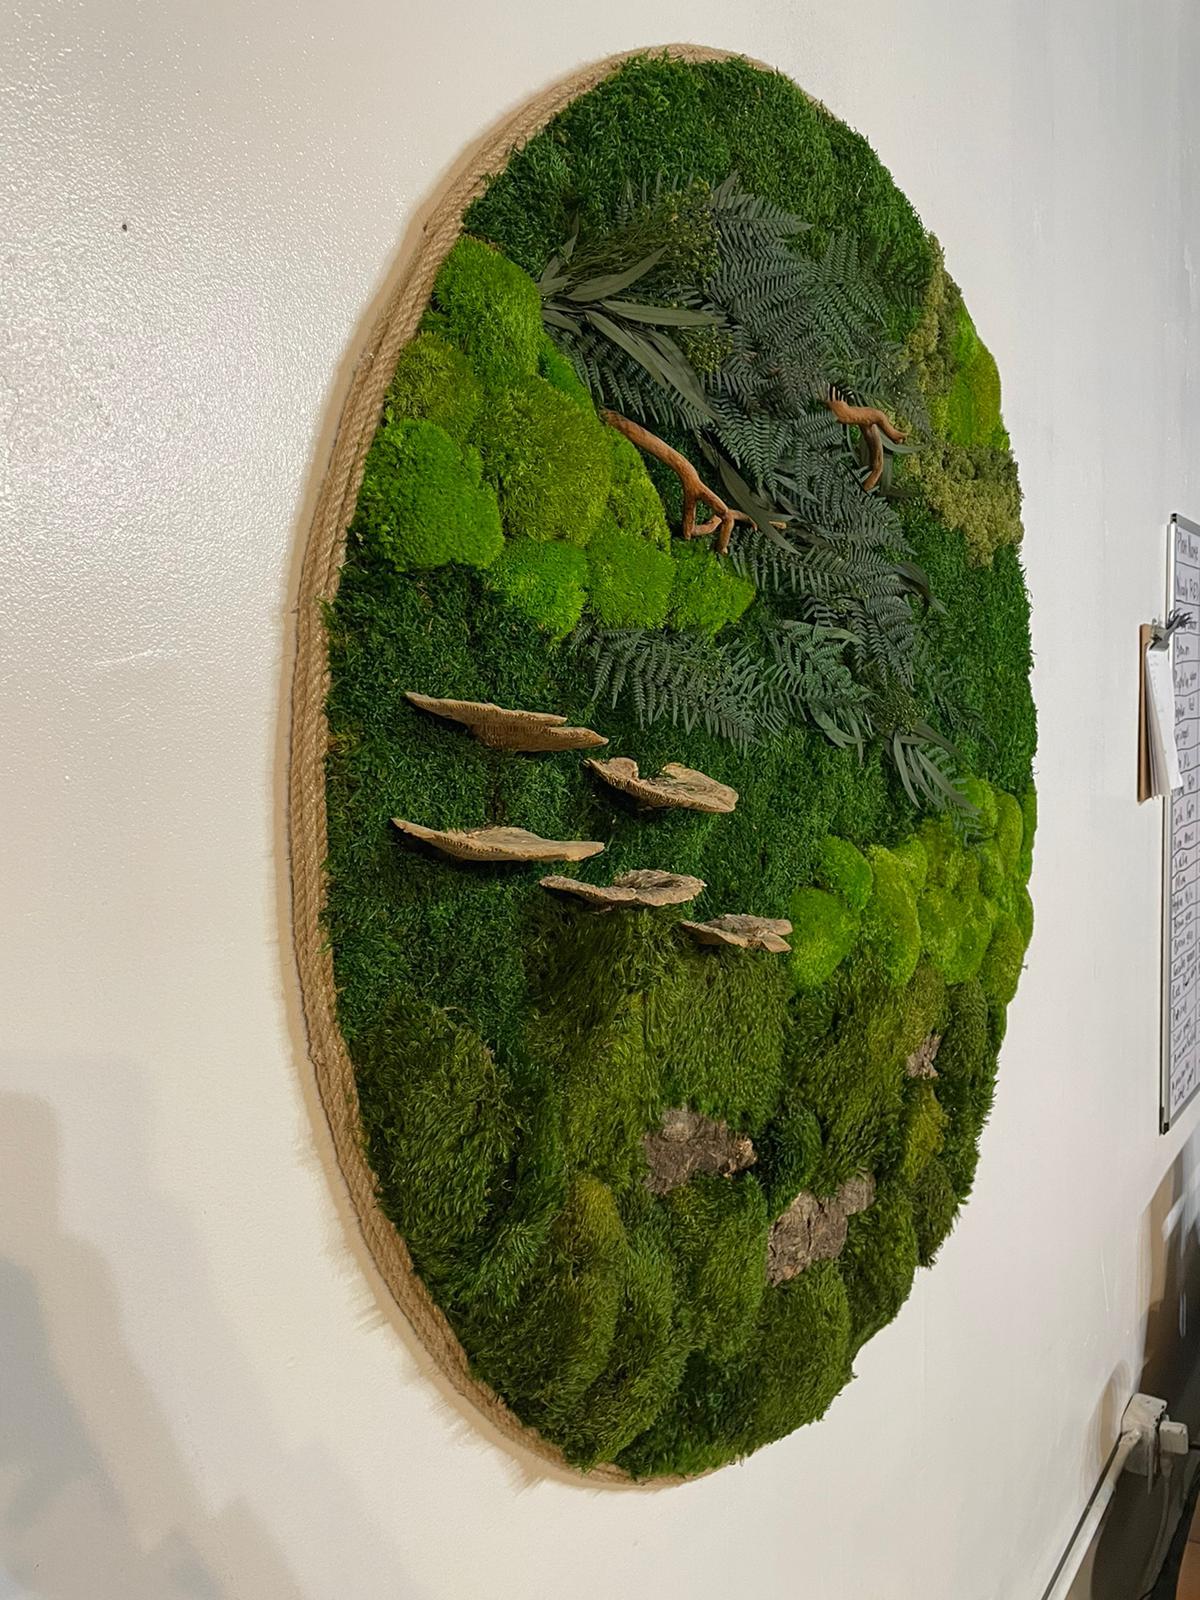 This piece was designed by Serkan Yapicilar, Lead Designer for Naturalist Interiors out of his Hoboken, NJ design studio.

It is made of natural preserved plants that are completely maintenance free. They do not have soil beneath their roots, nor